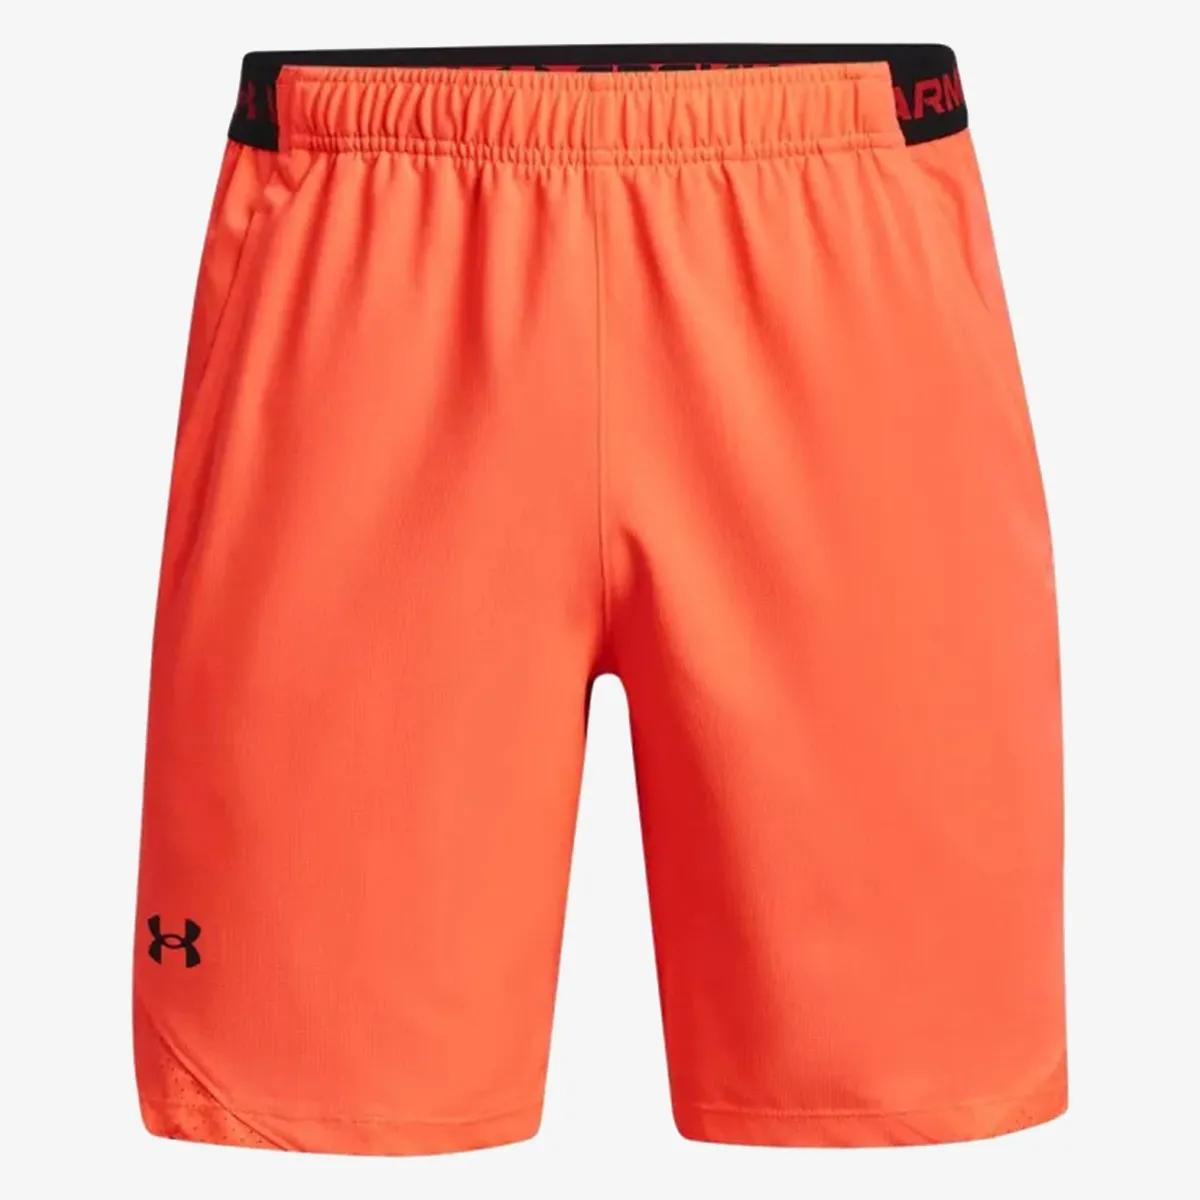 UNDER ARMOUR UA VANISH WOVEN 8IN SHORTS-ORG 